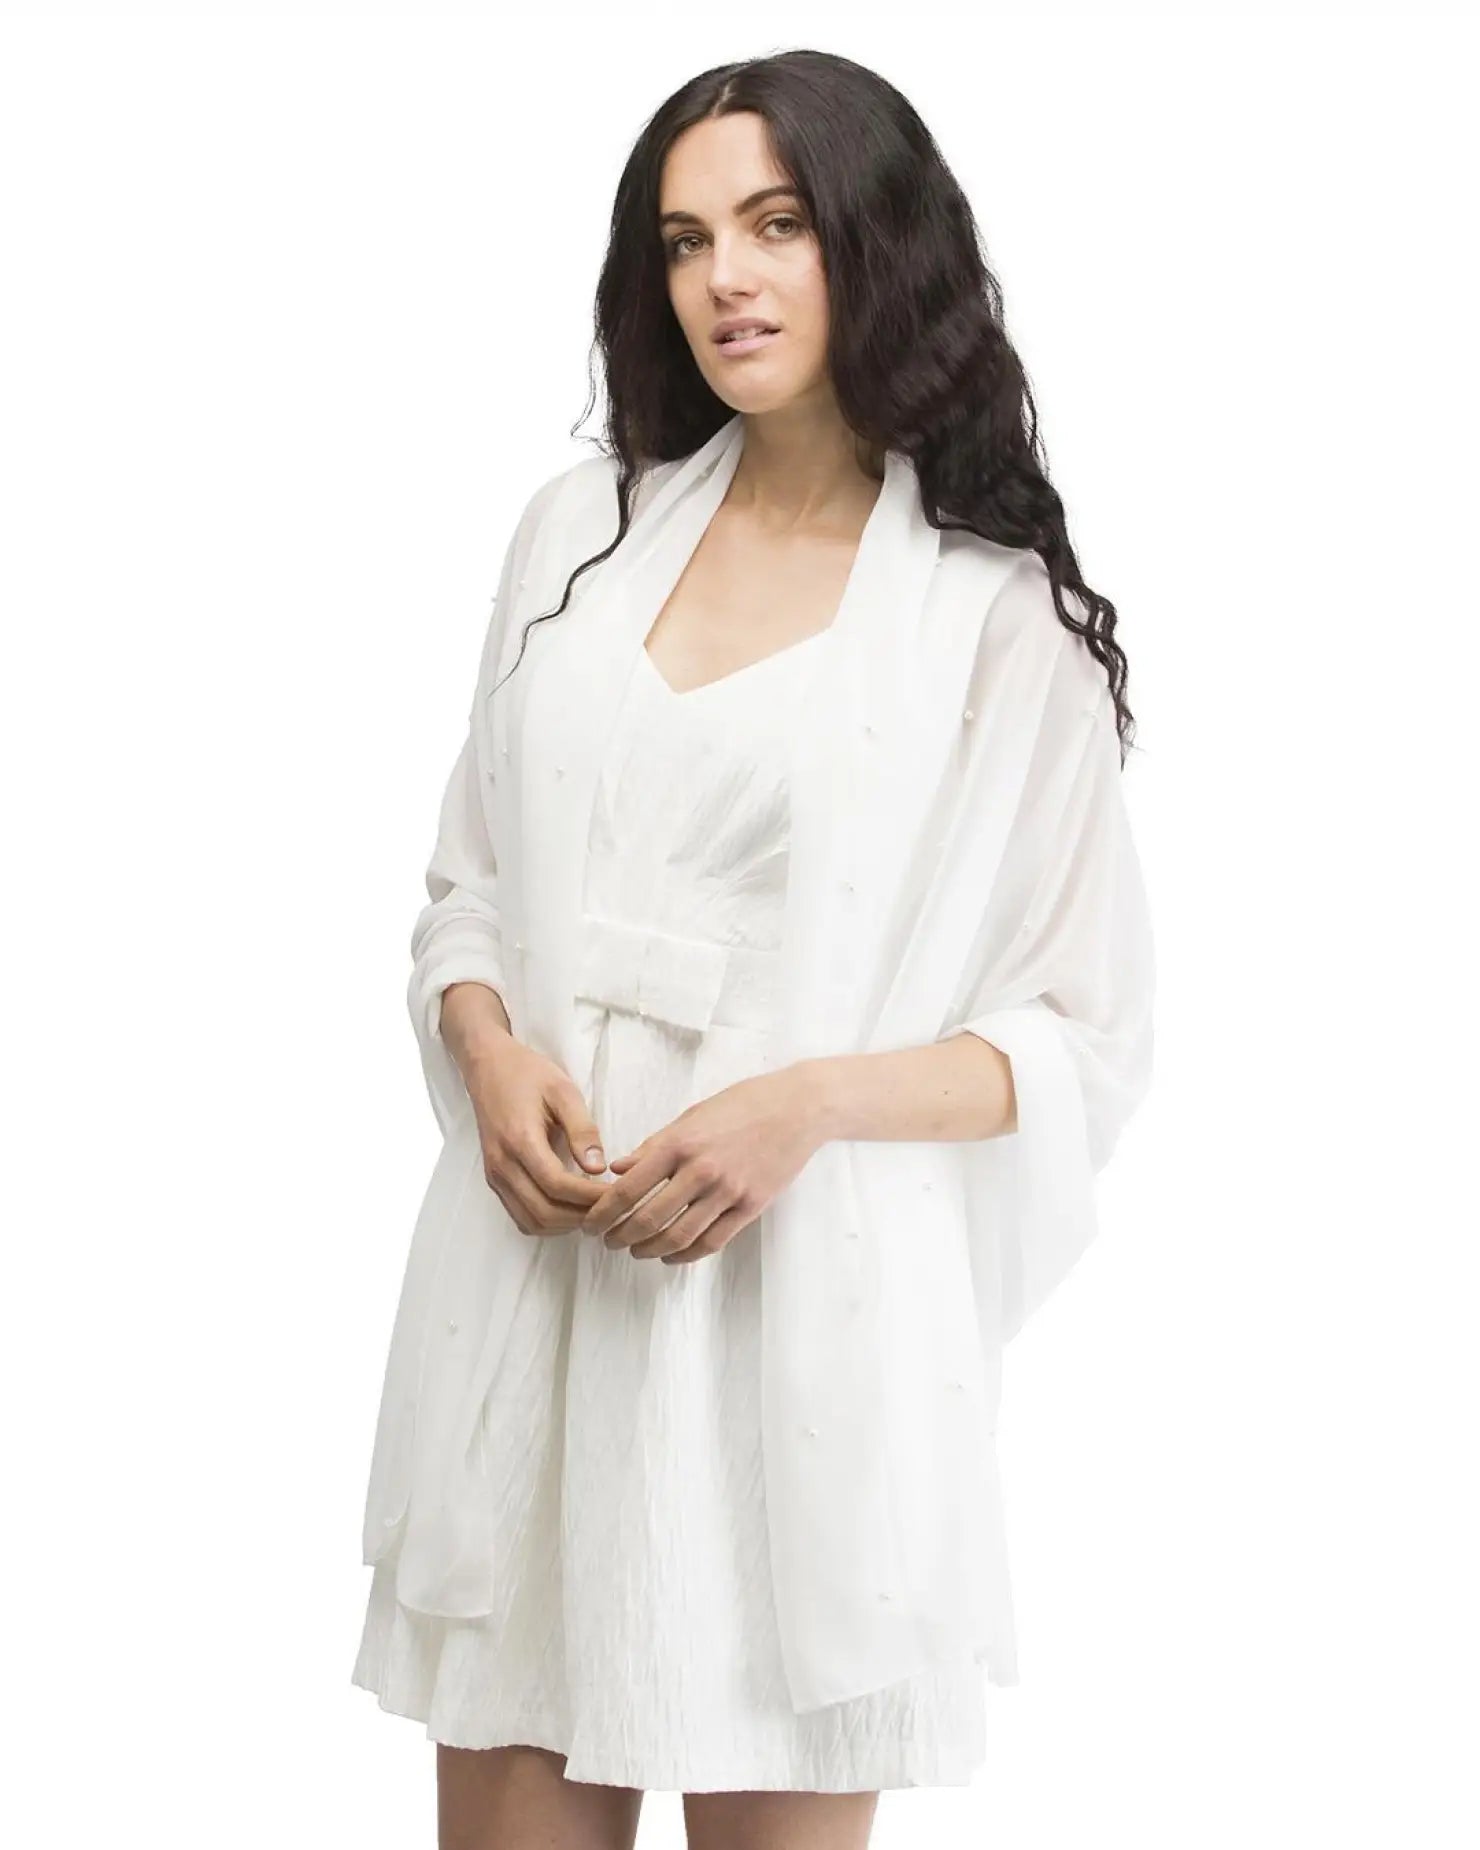 Woman in white pearl embellished chiffon robe, versatile and oversized wrap scarf